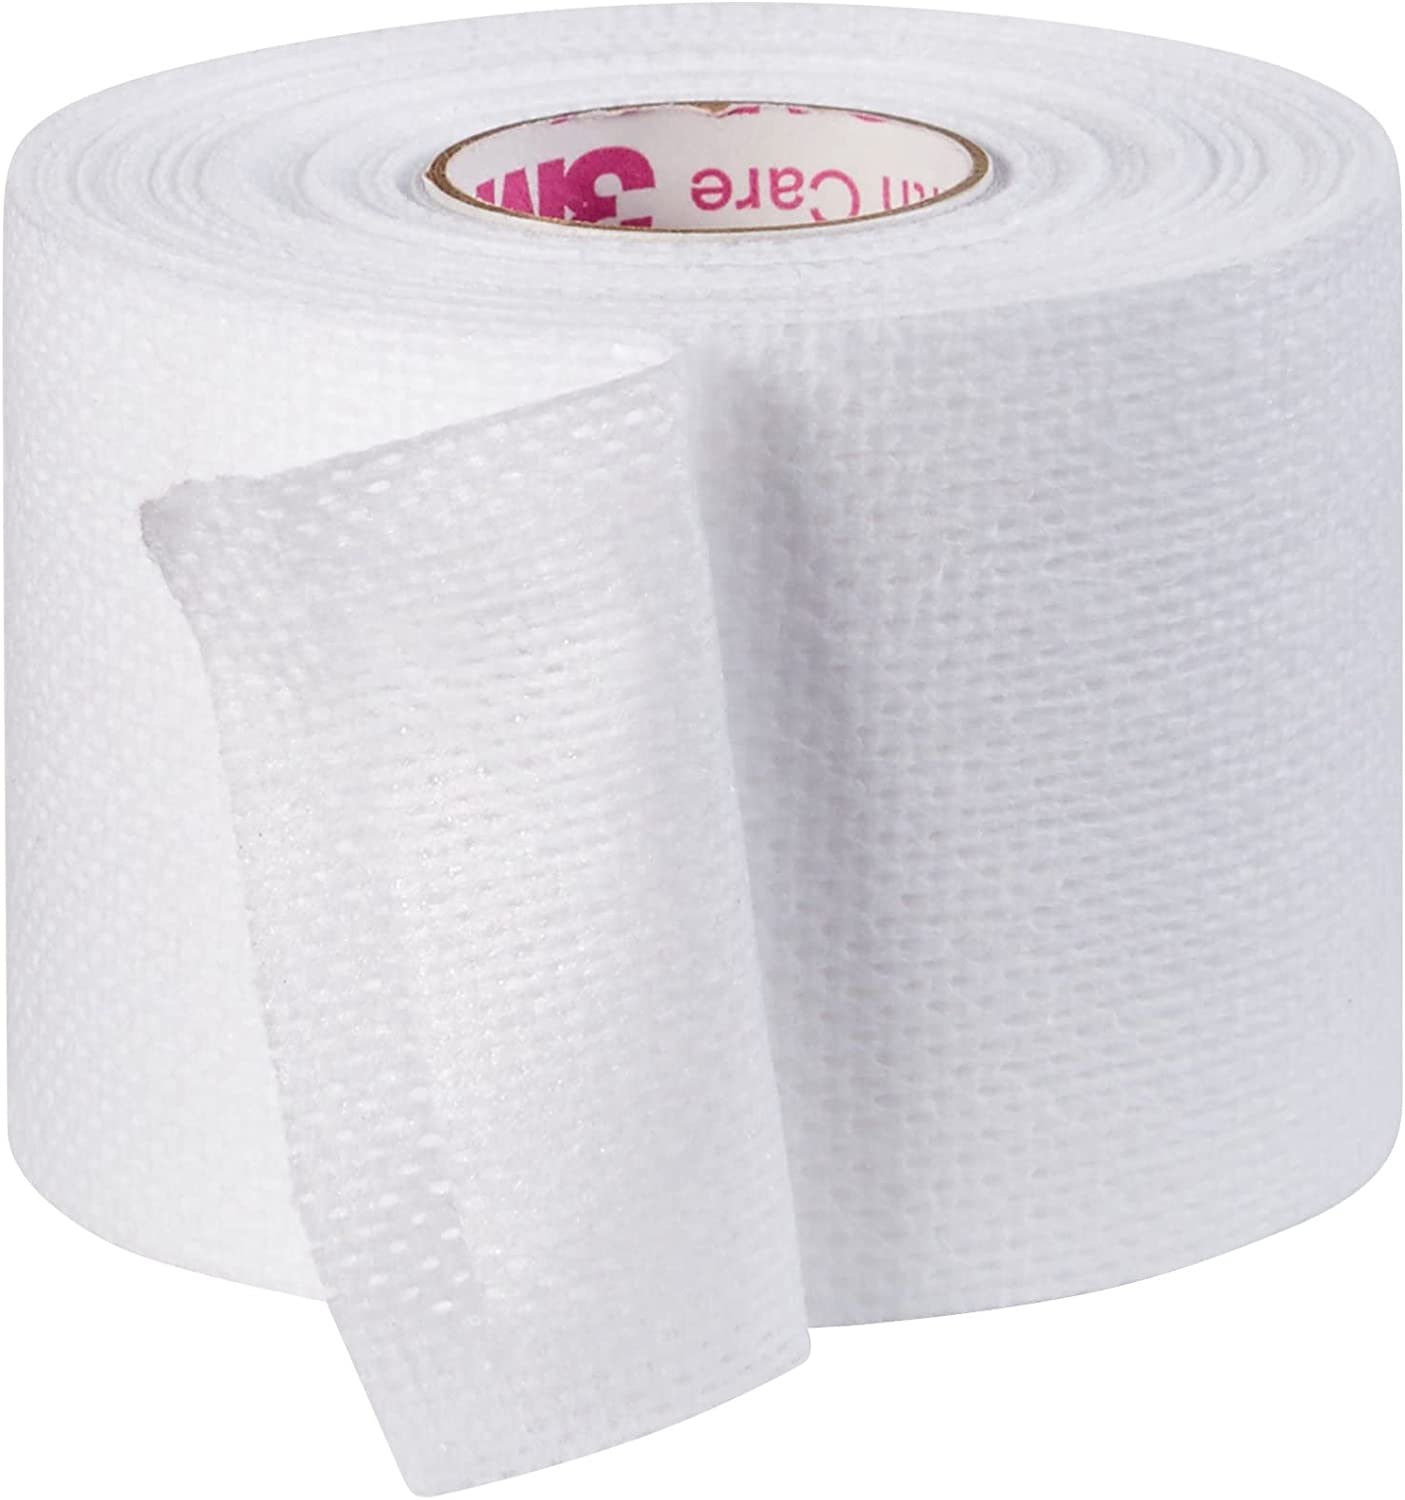 3M Medipore Soft Cloth Surgical Tape - 4 x 10 Yds - Each 1 Count (Pack of  1)